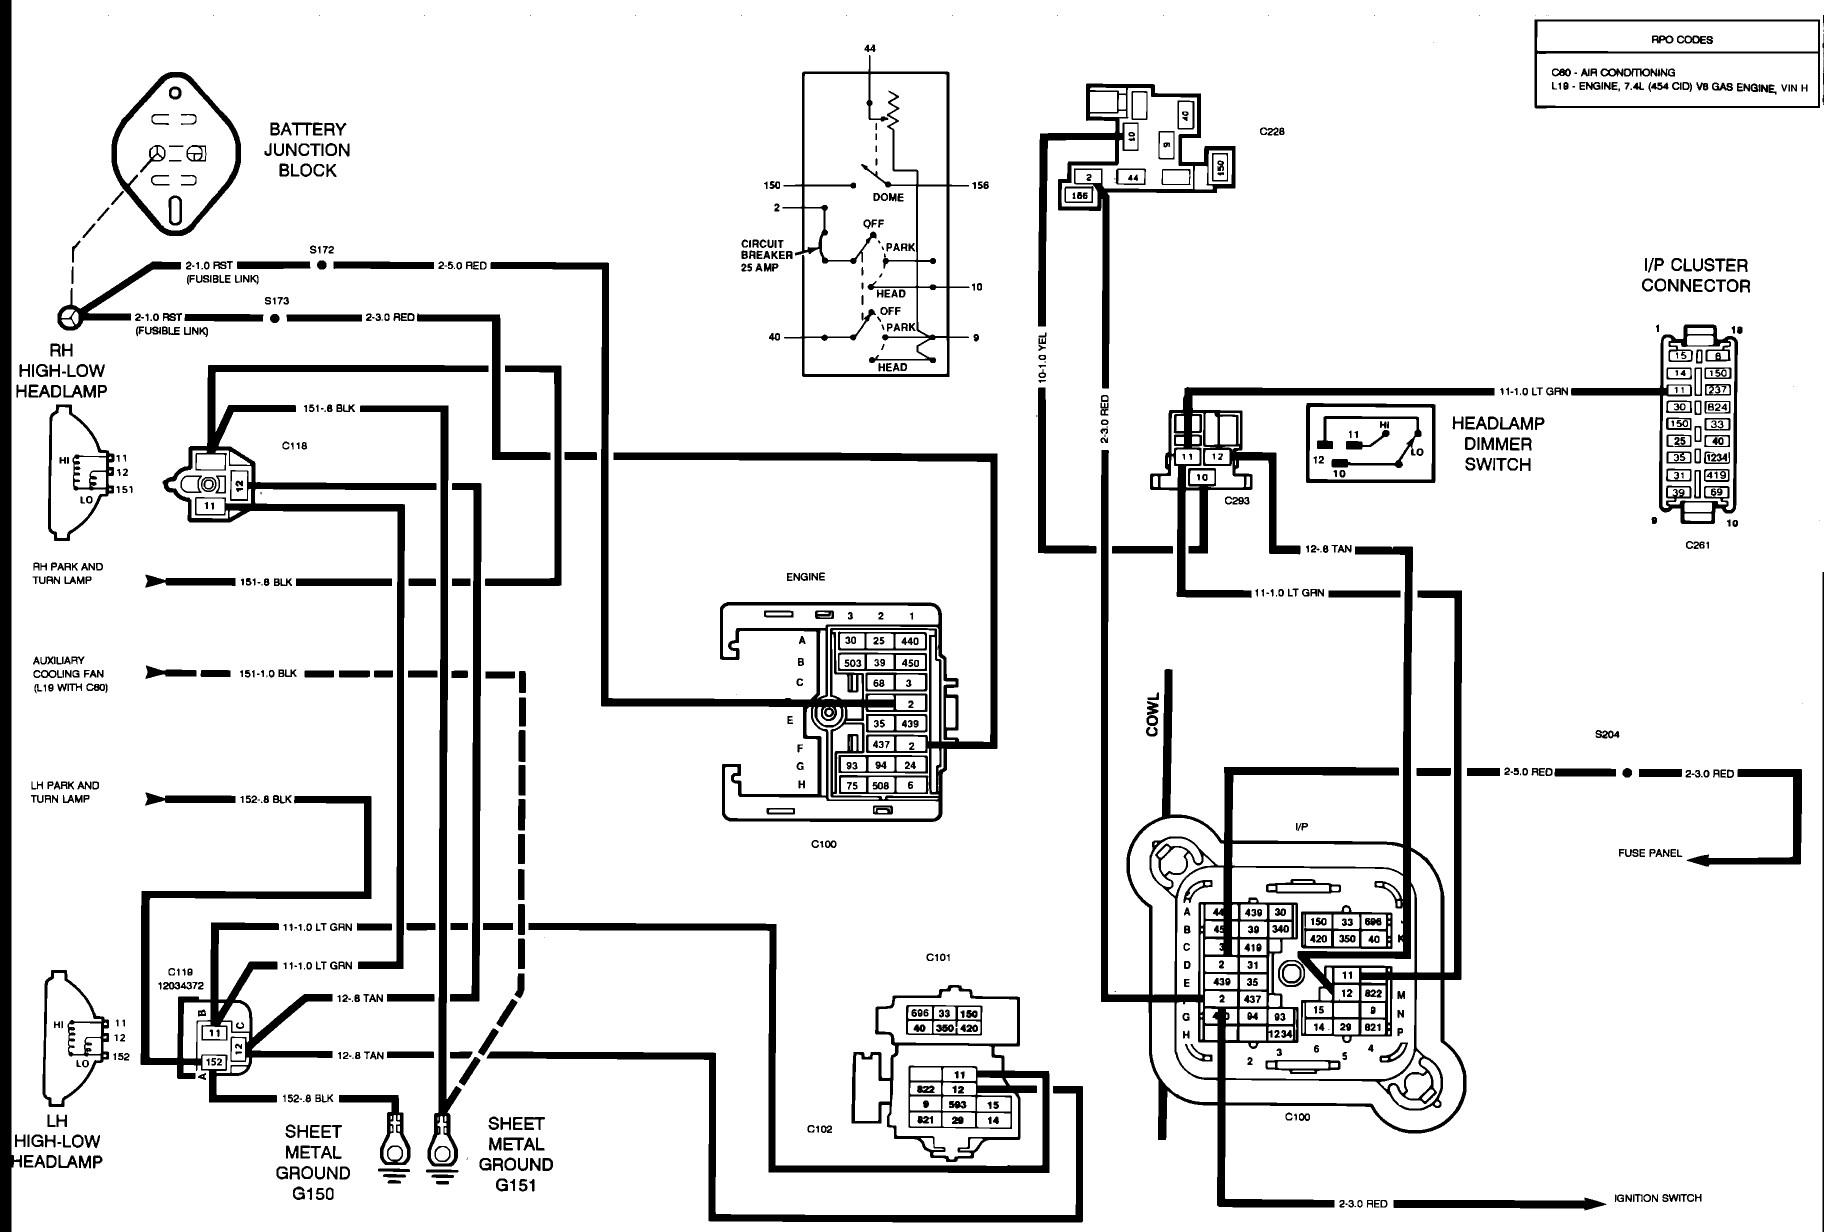 87 Chevy Truck Wiring Diagram Pin by Ayaco 011 On Auto Manual Parts Wiring Diagram Of 87 Chevy Truck Wiring Diagram